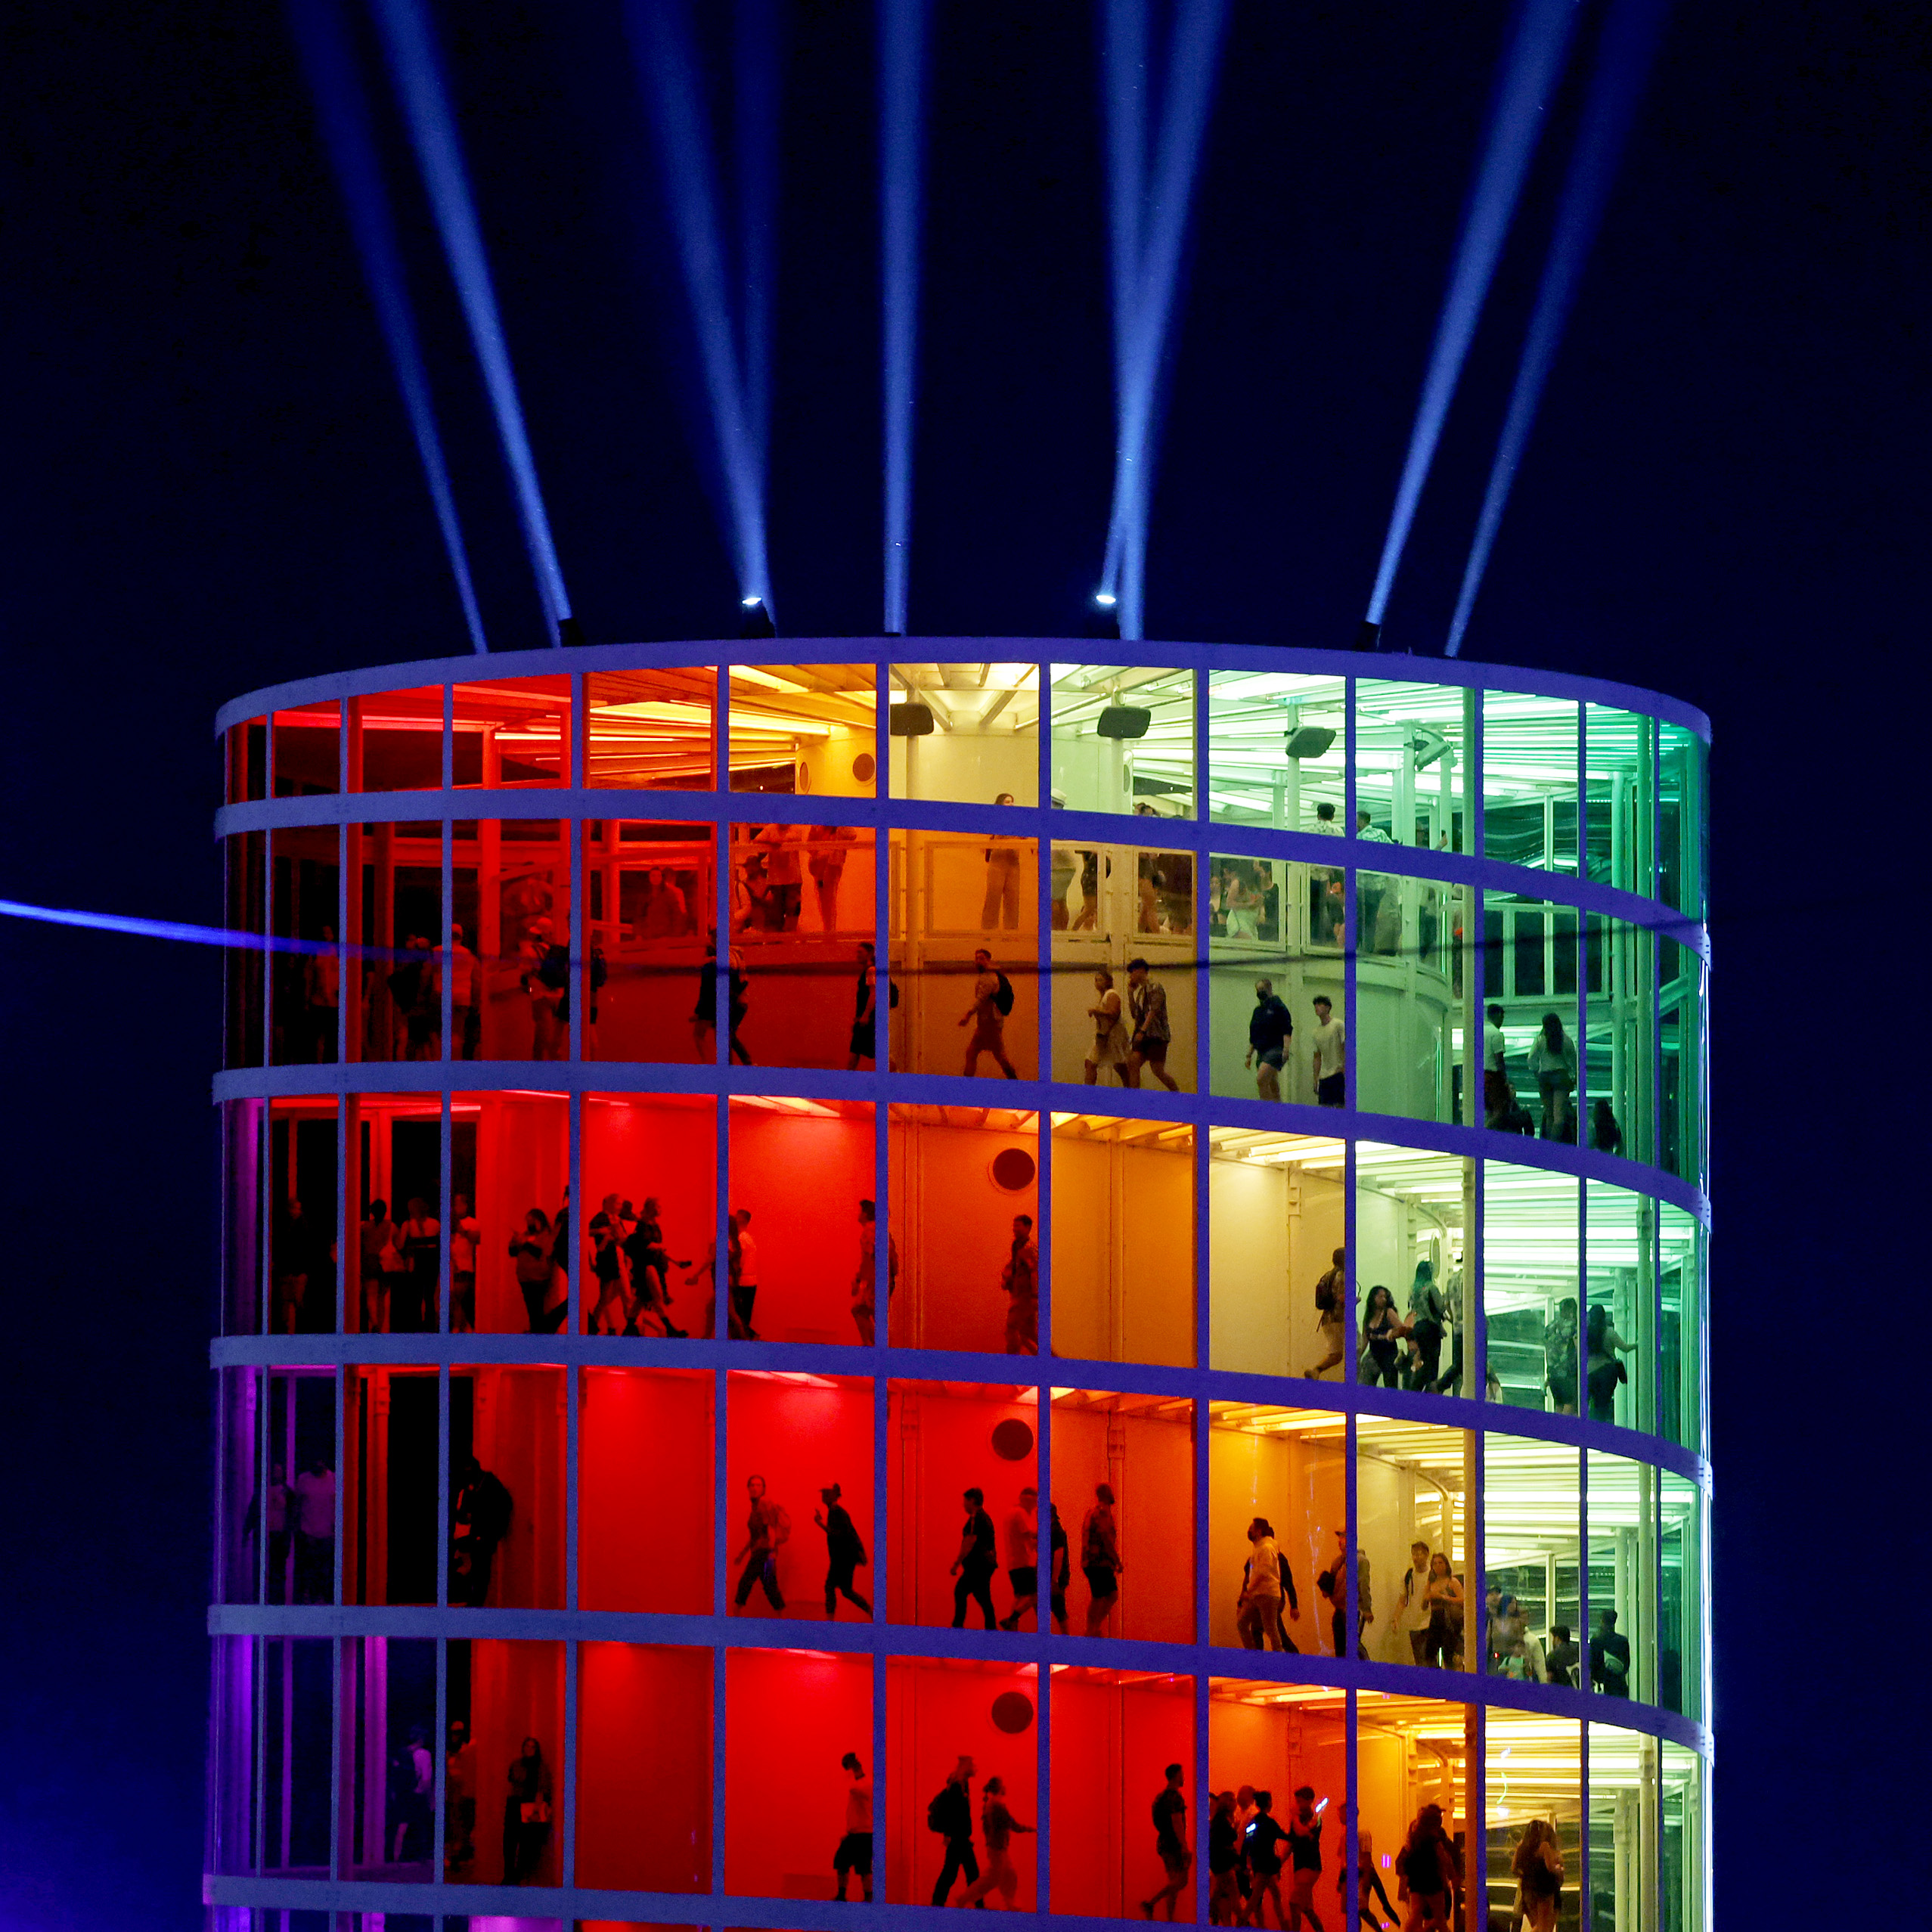 One of the Coachella buildings with a colored light installation, in its 2022 edition (Photo by Frazer Harrison/Getty Images for Coachella)